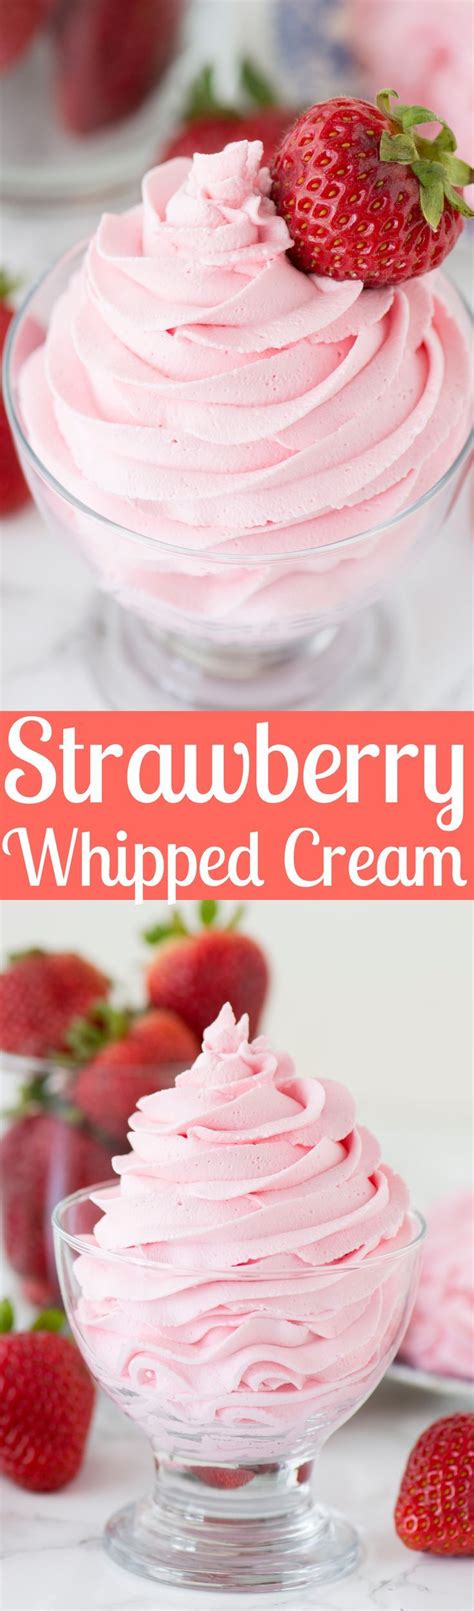 Whipping cream can be used for several purposes. Homemade strawberry whipped cream using only 3 ingredients ...